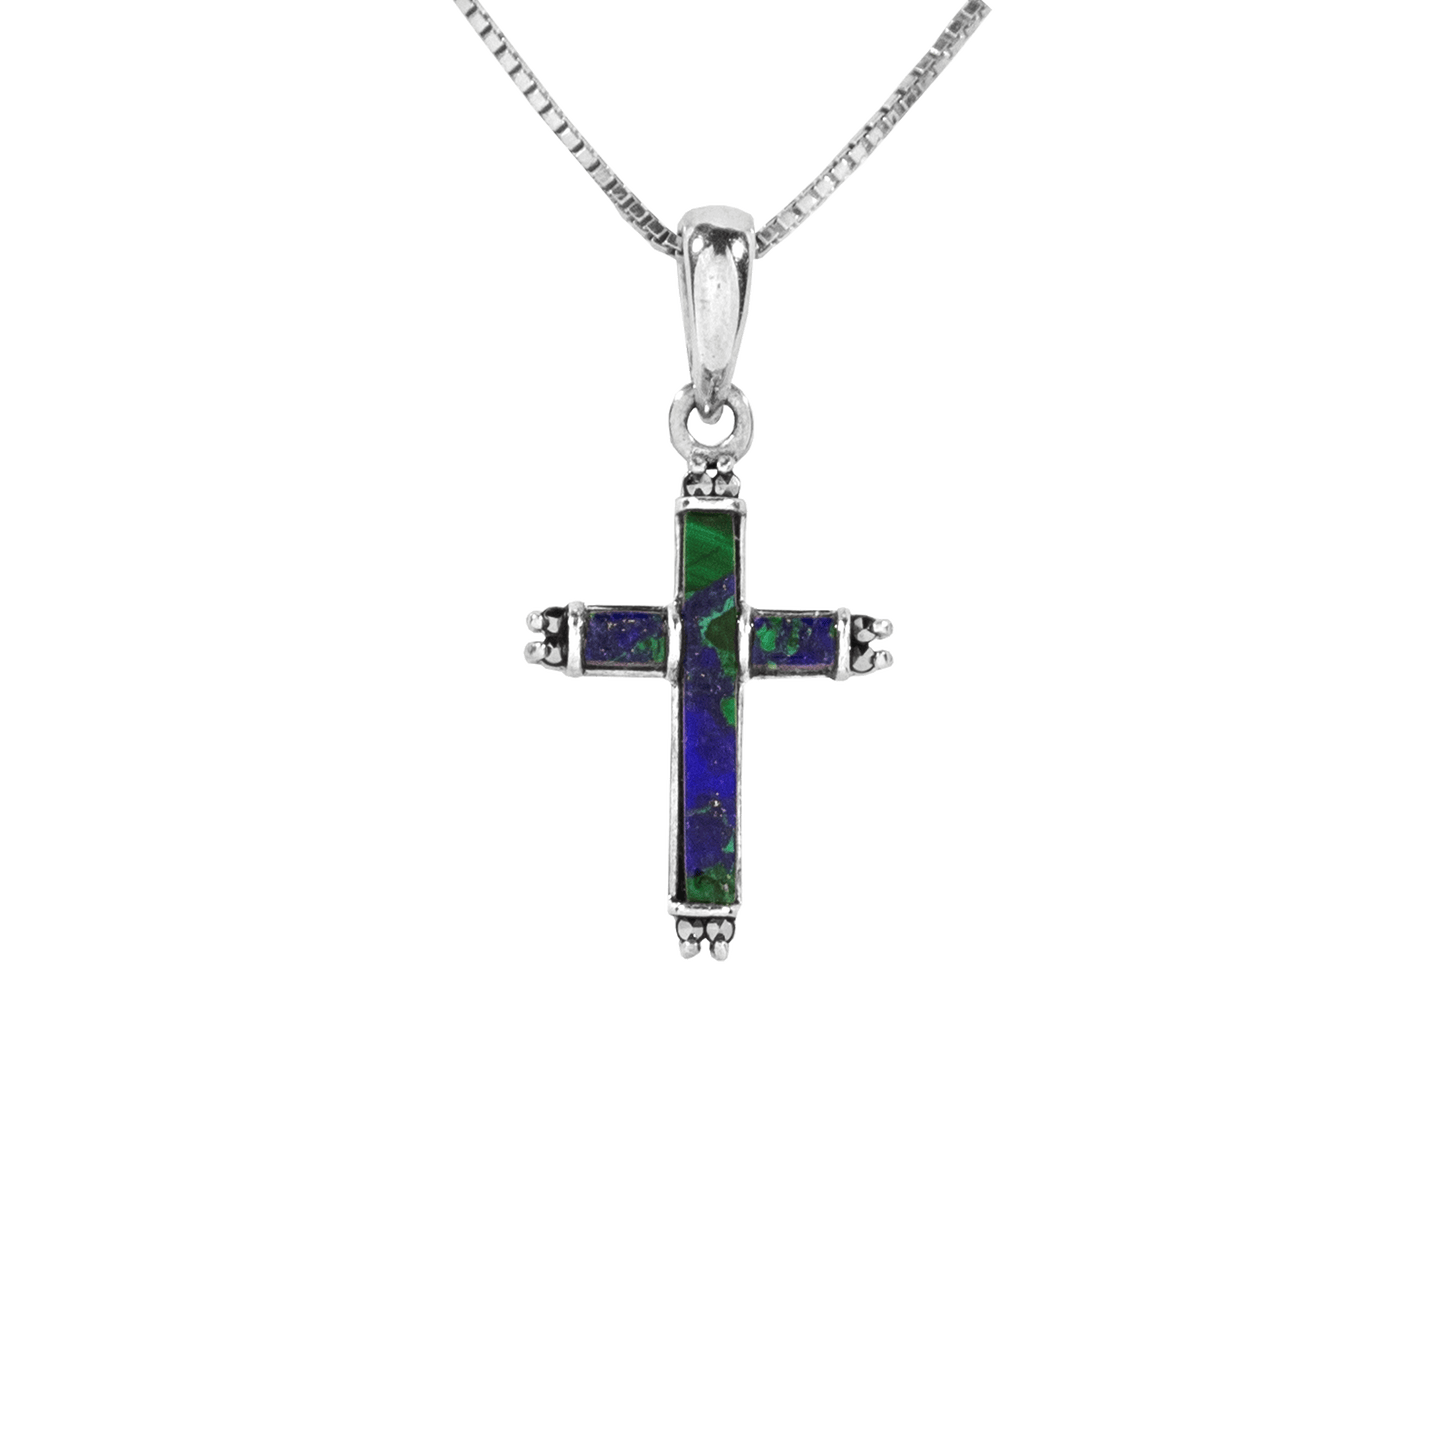 Eilat Stone Cross Necklace with Marcasite Crystals at each end of the cross on a Sterling Silver Chain.